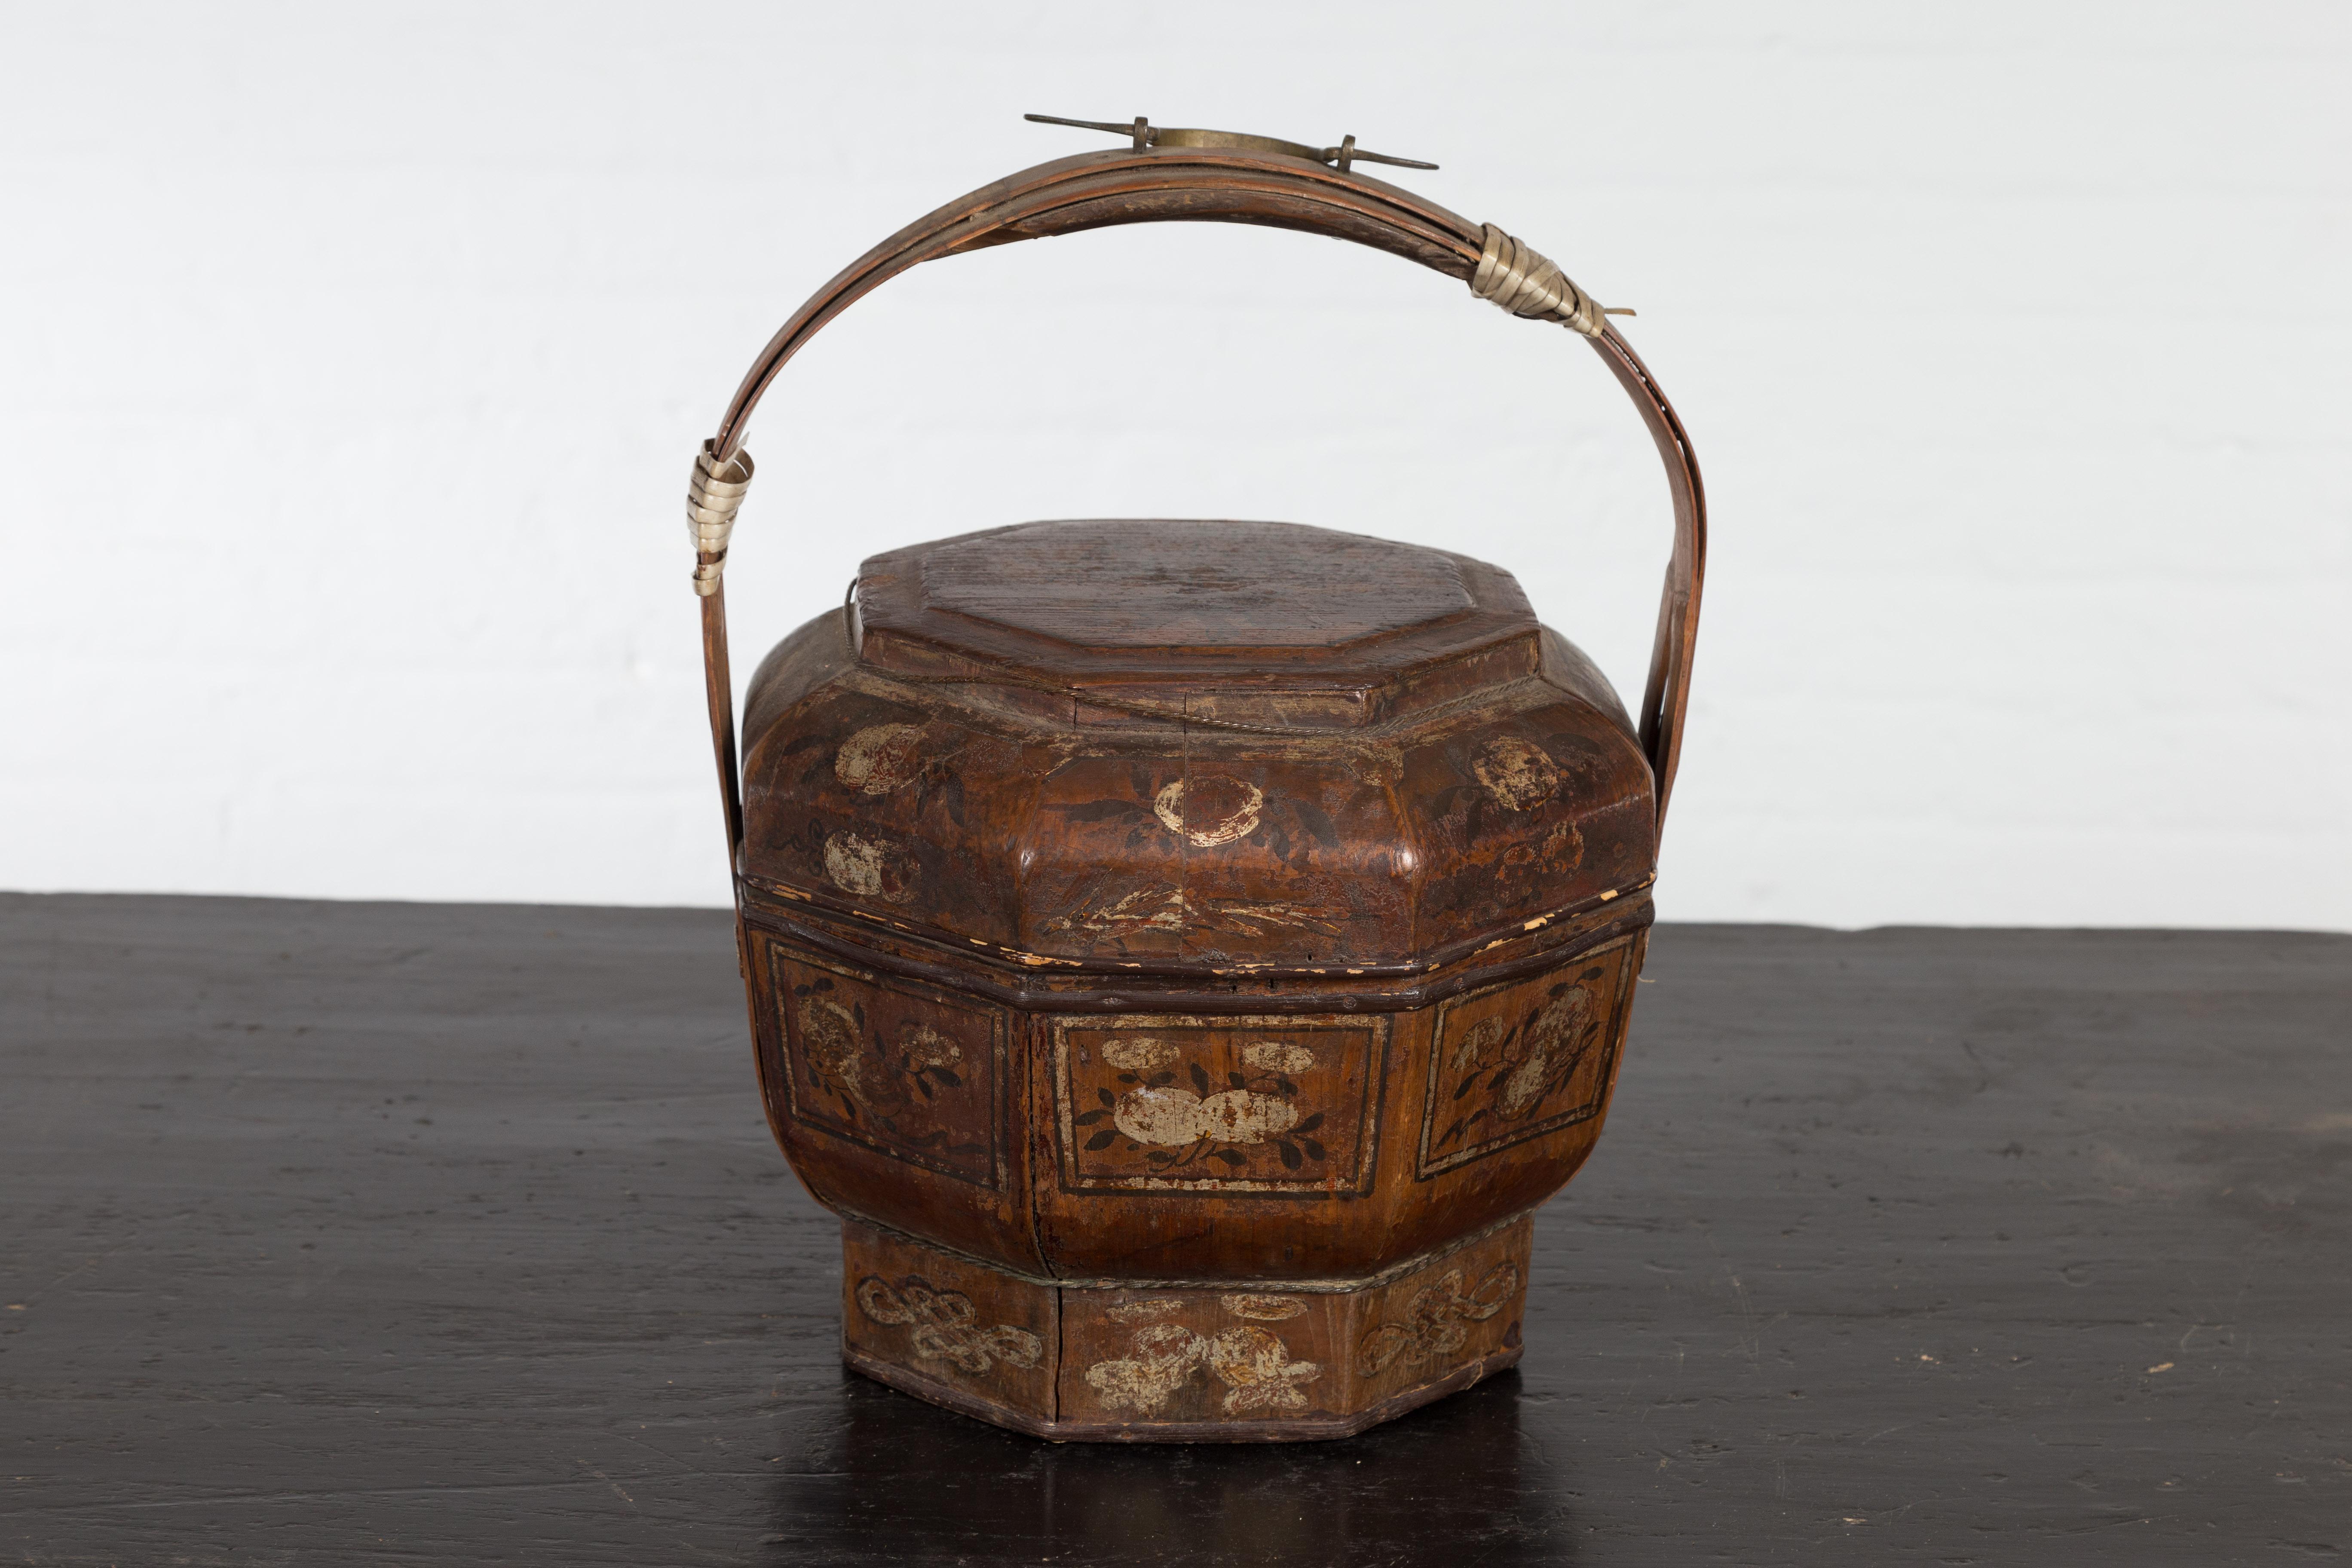 A Chinese late Qing Dynasty period antique lacquered octagonal basket from the early 20th century with hand painted floral décor, large handle and made to deliver gifts. Created in China during the late Qing Dynasty period in the early years of the